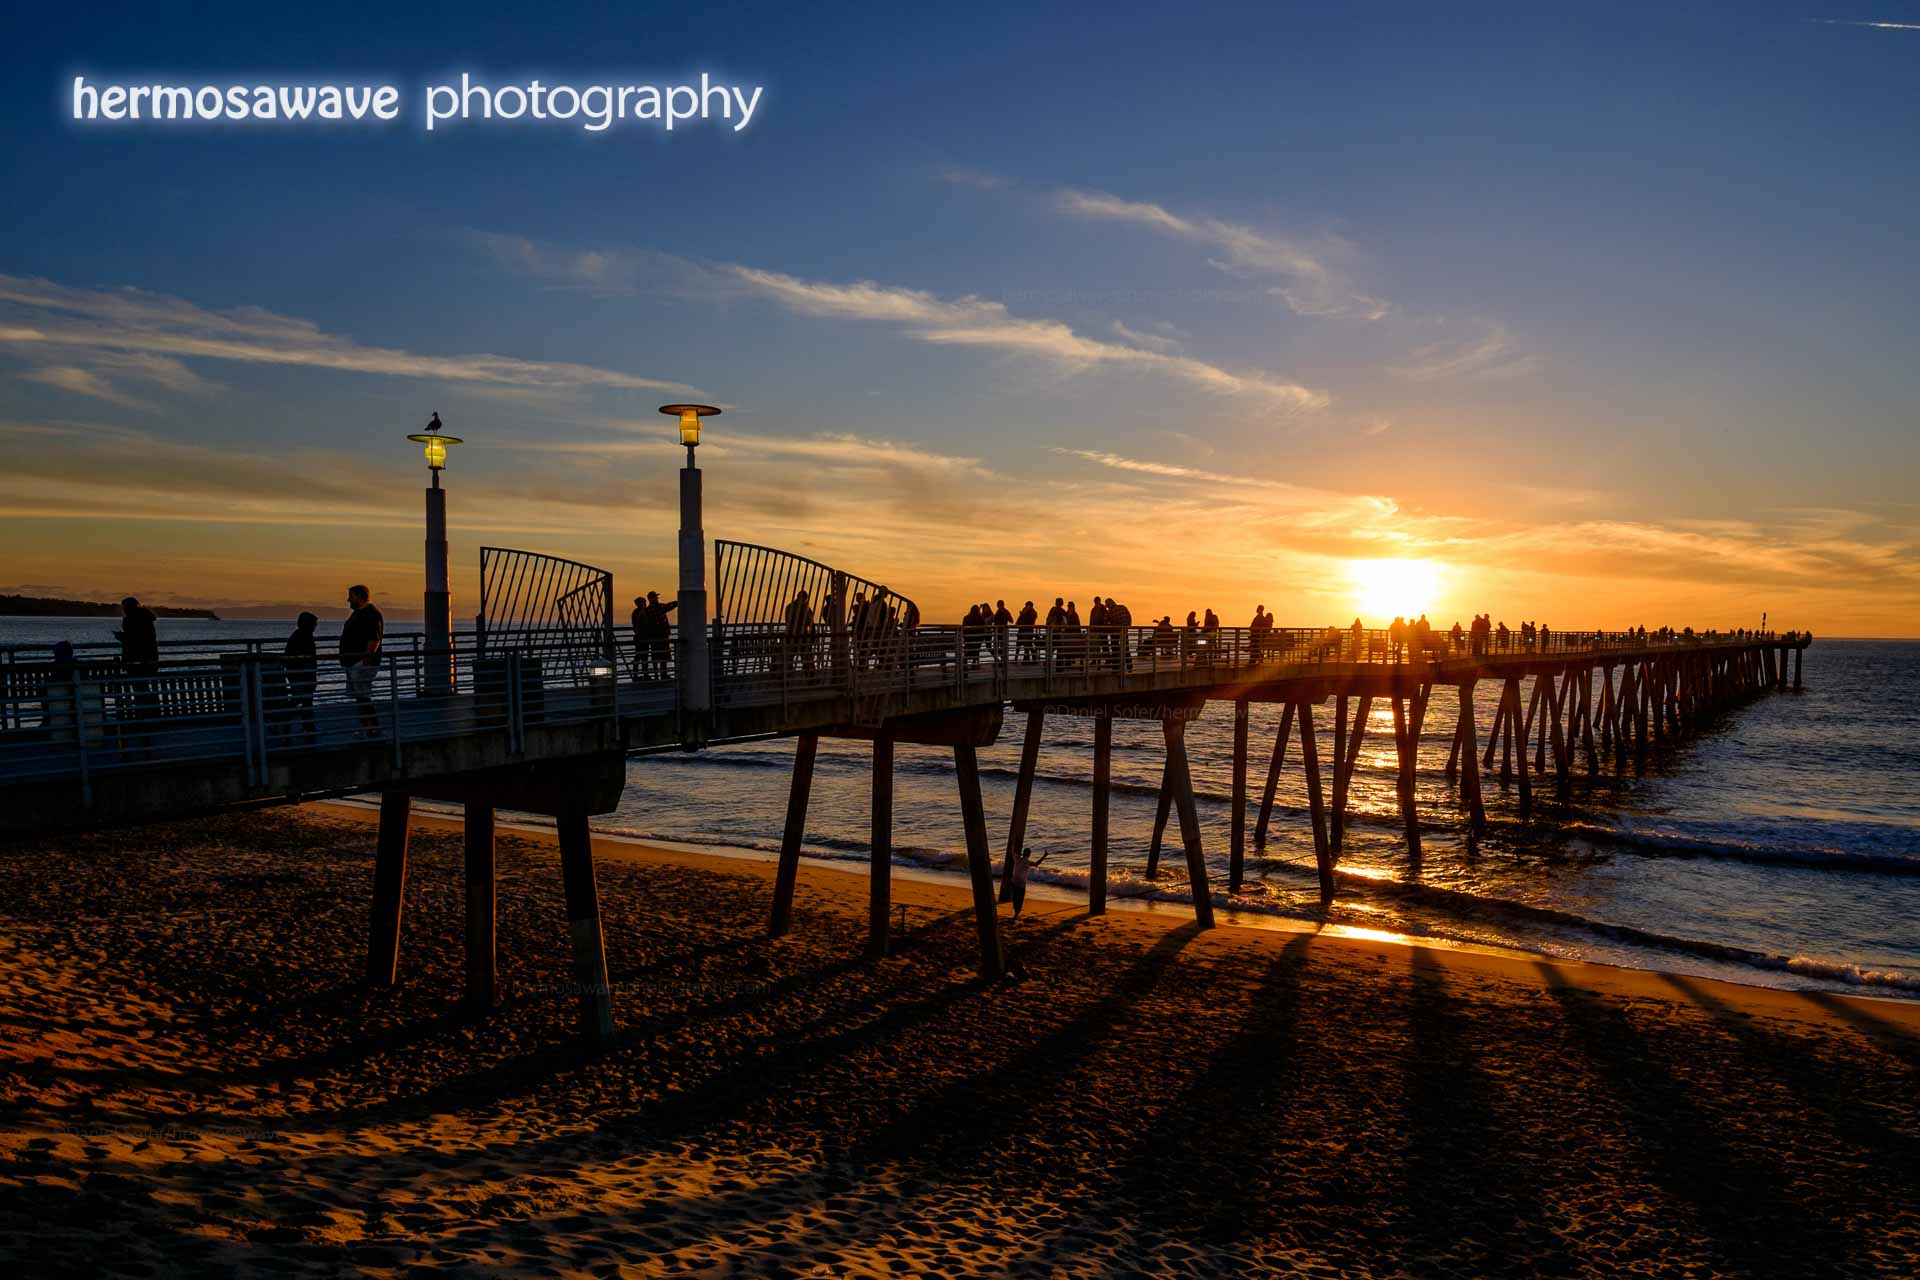 Sunset Over the Hermosa Pier